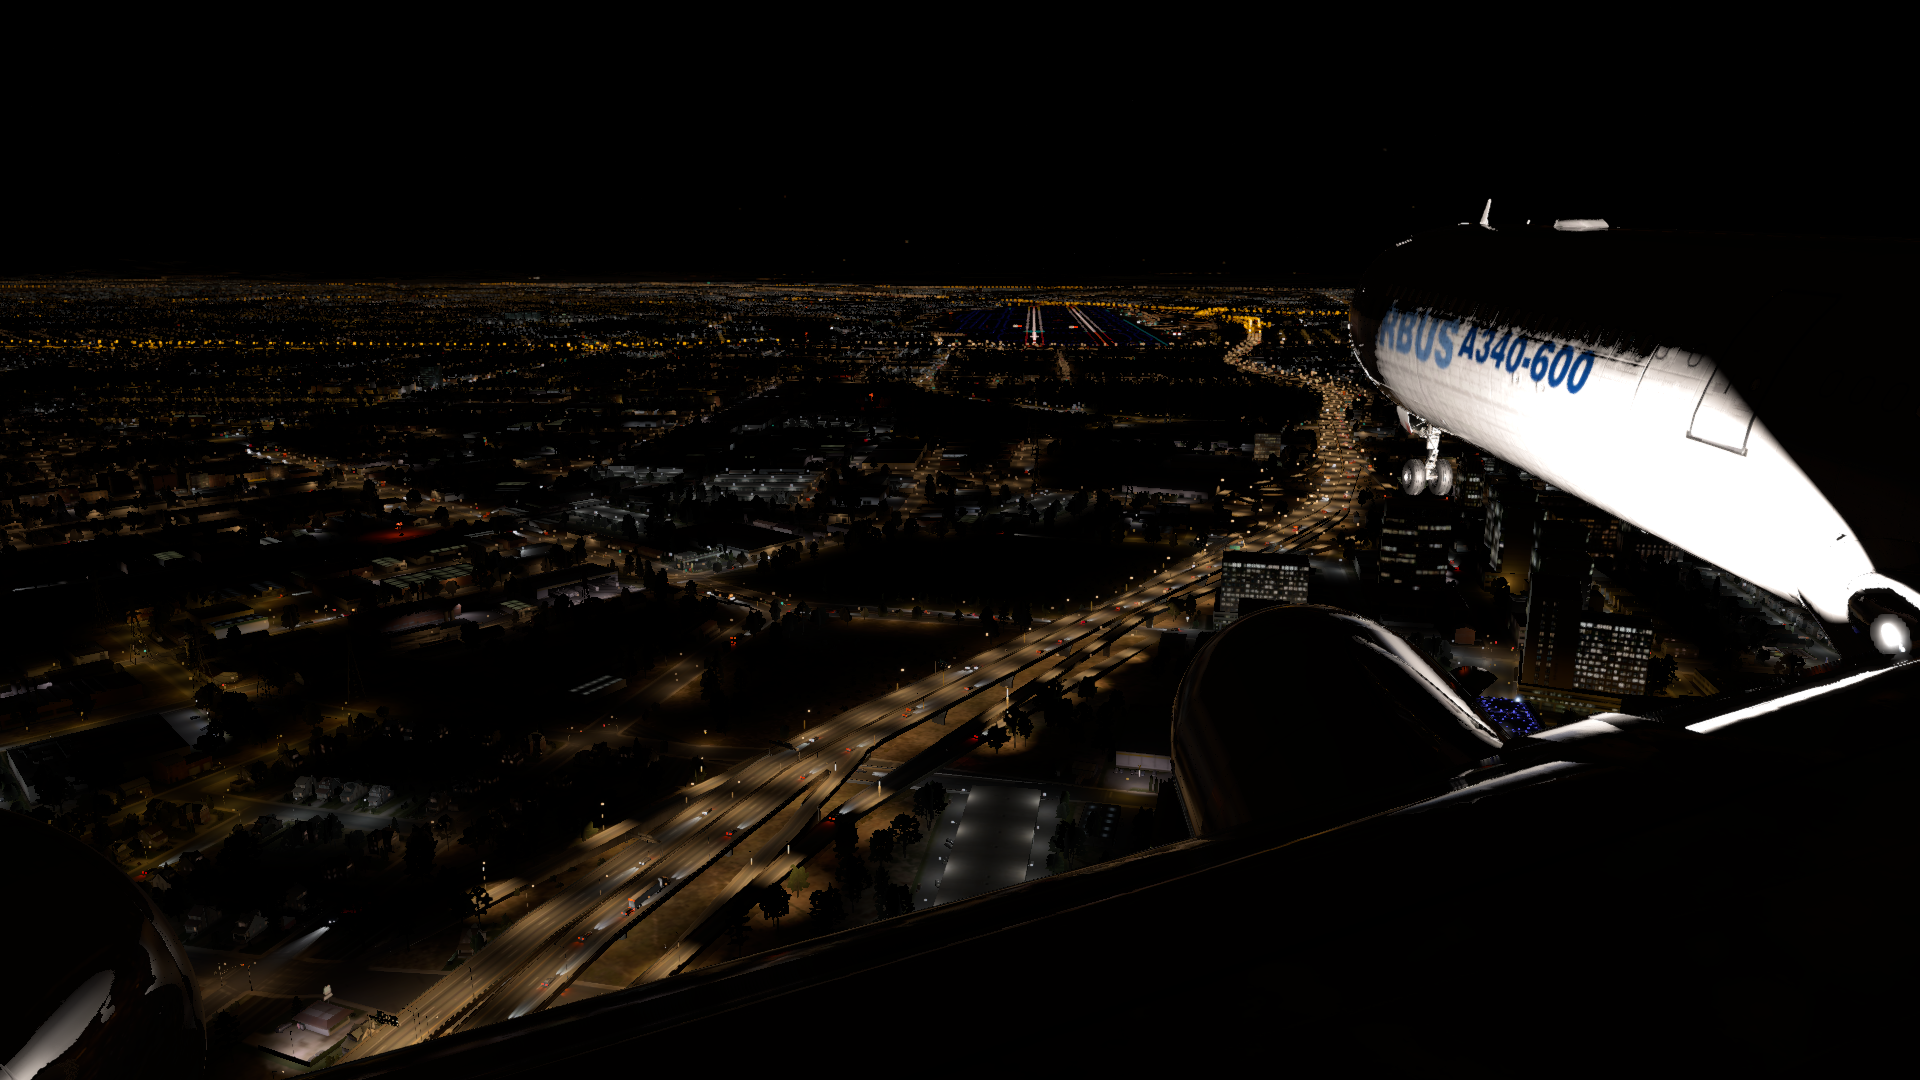 A340-600 on approach to KSJC 30L, just passing over downtown San Jose at night. The freeway is all lit up and the runways are visible. It's a dark night.